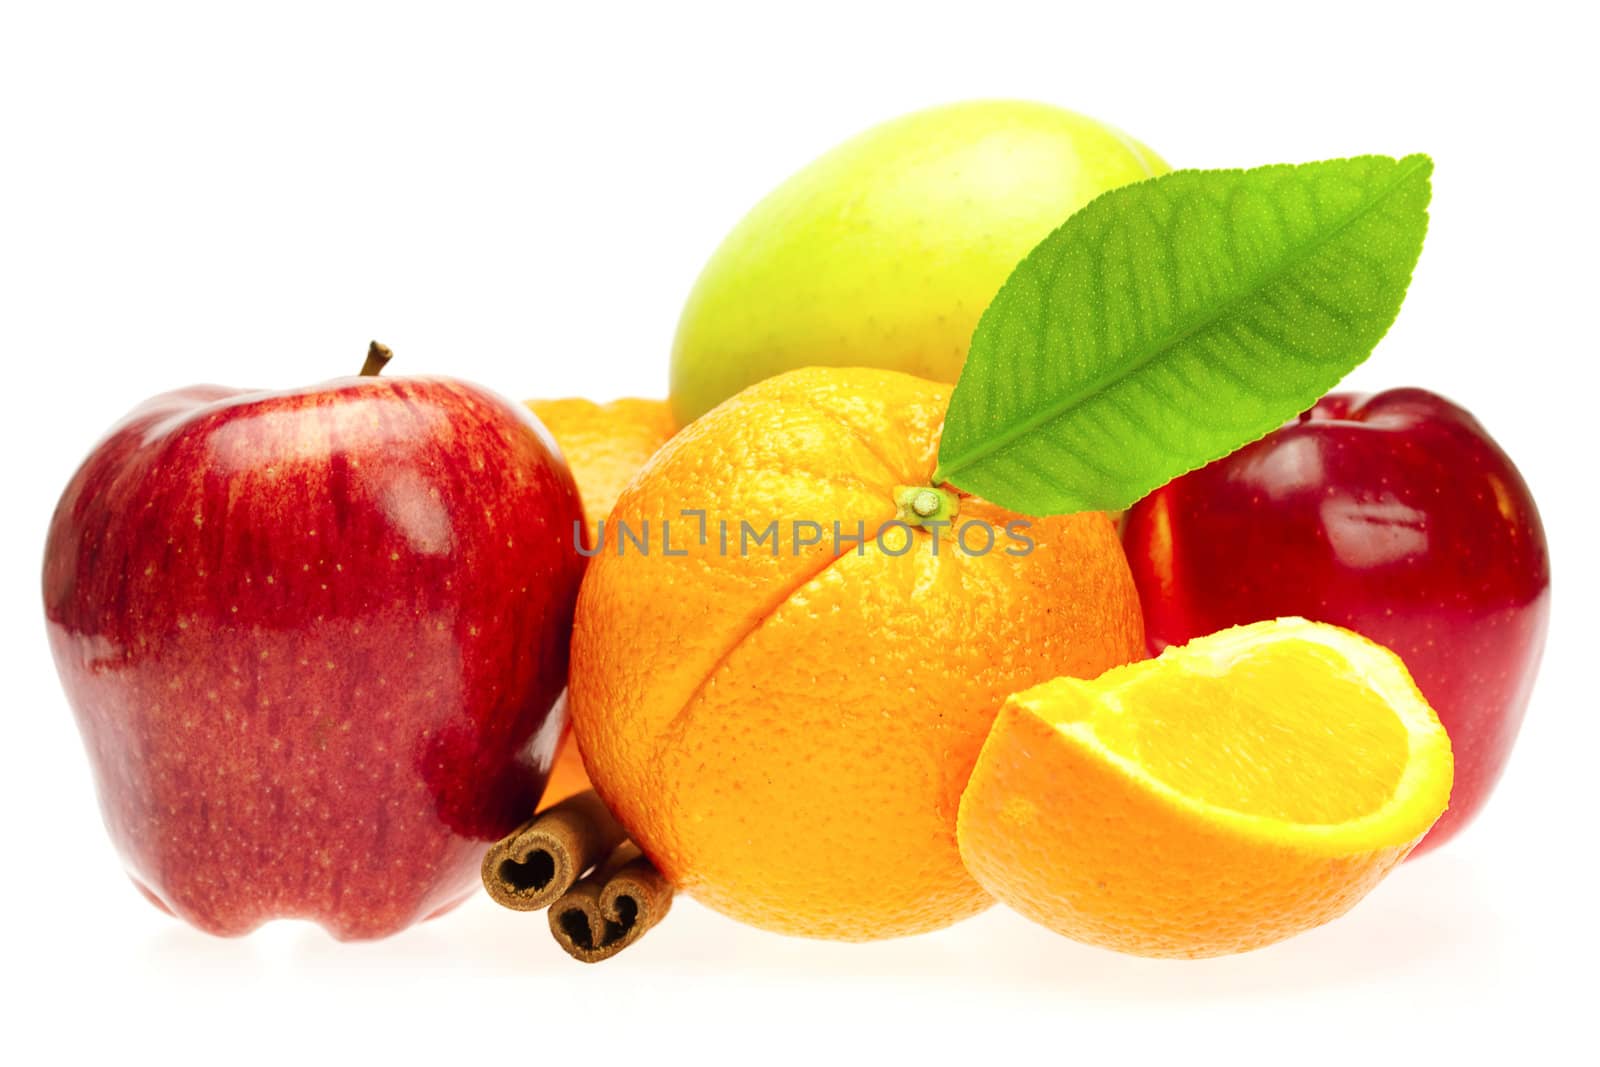 oranges, cinnamon sticks and apples  isolated on white